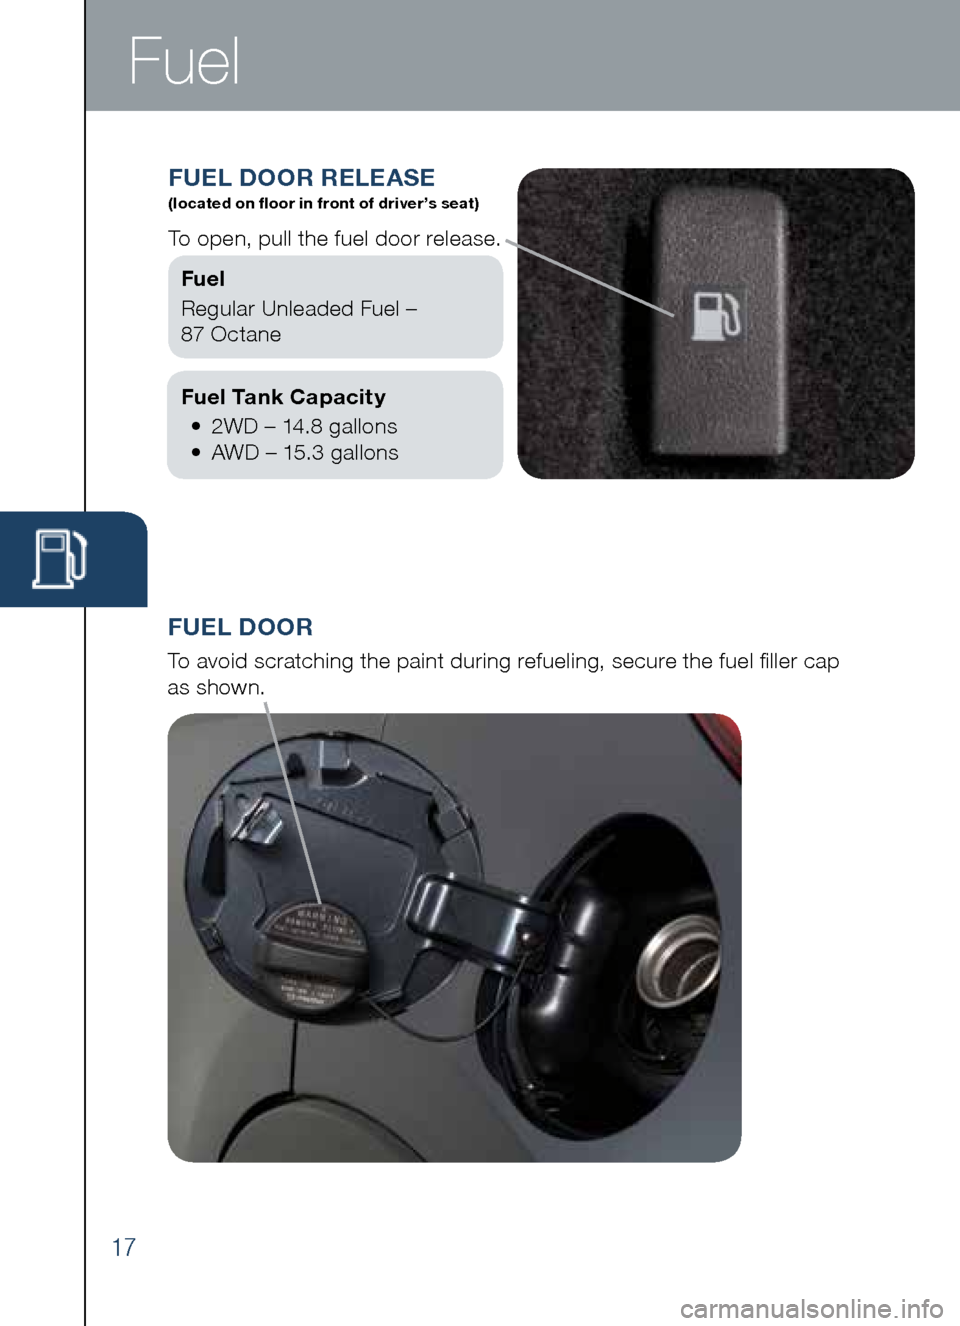 MAZDA MODEL CX-5 2014  Smart Start Guide (in English) 17
Fuel
FUEL D OOR
To	avoid	scratching	the	paint	during	refueling,	secure	the	fuel	filler	cap 		
as	shown.
FUE L DOOR R ELEASE  (located on floor in front of driver’s seat)
To	open,	pull	the	fuel	do